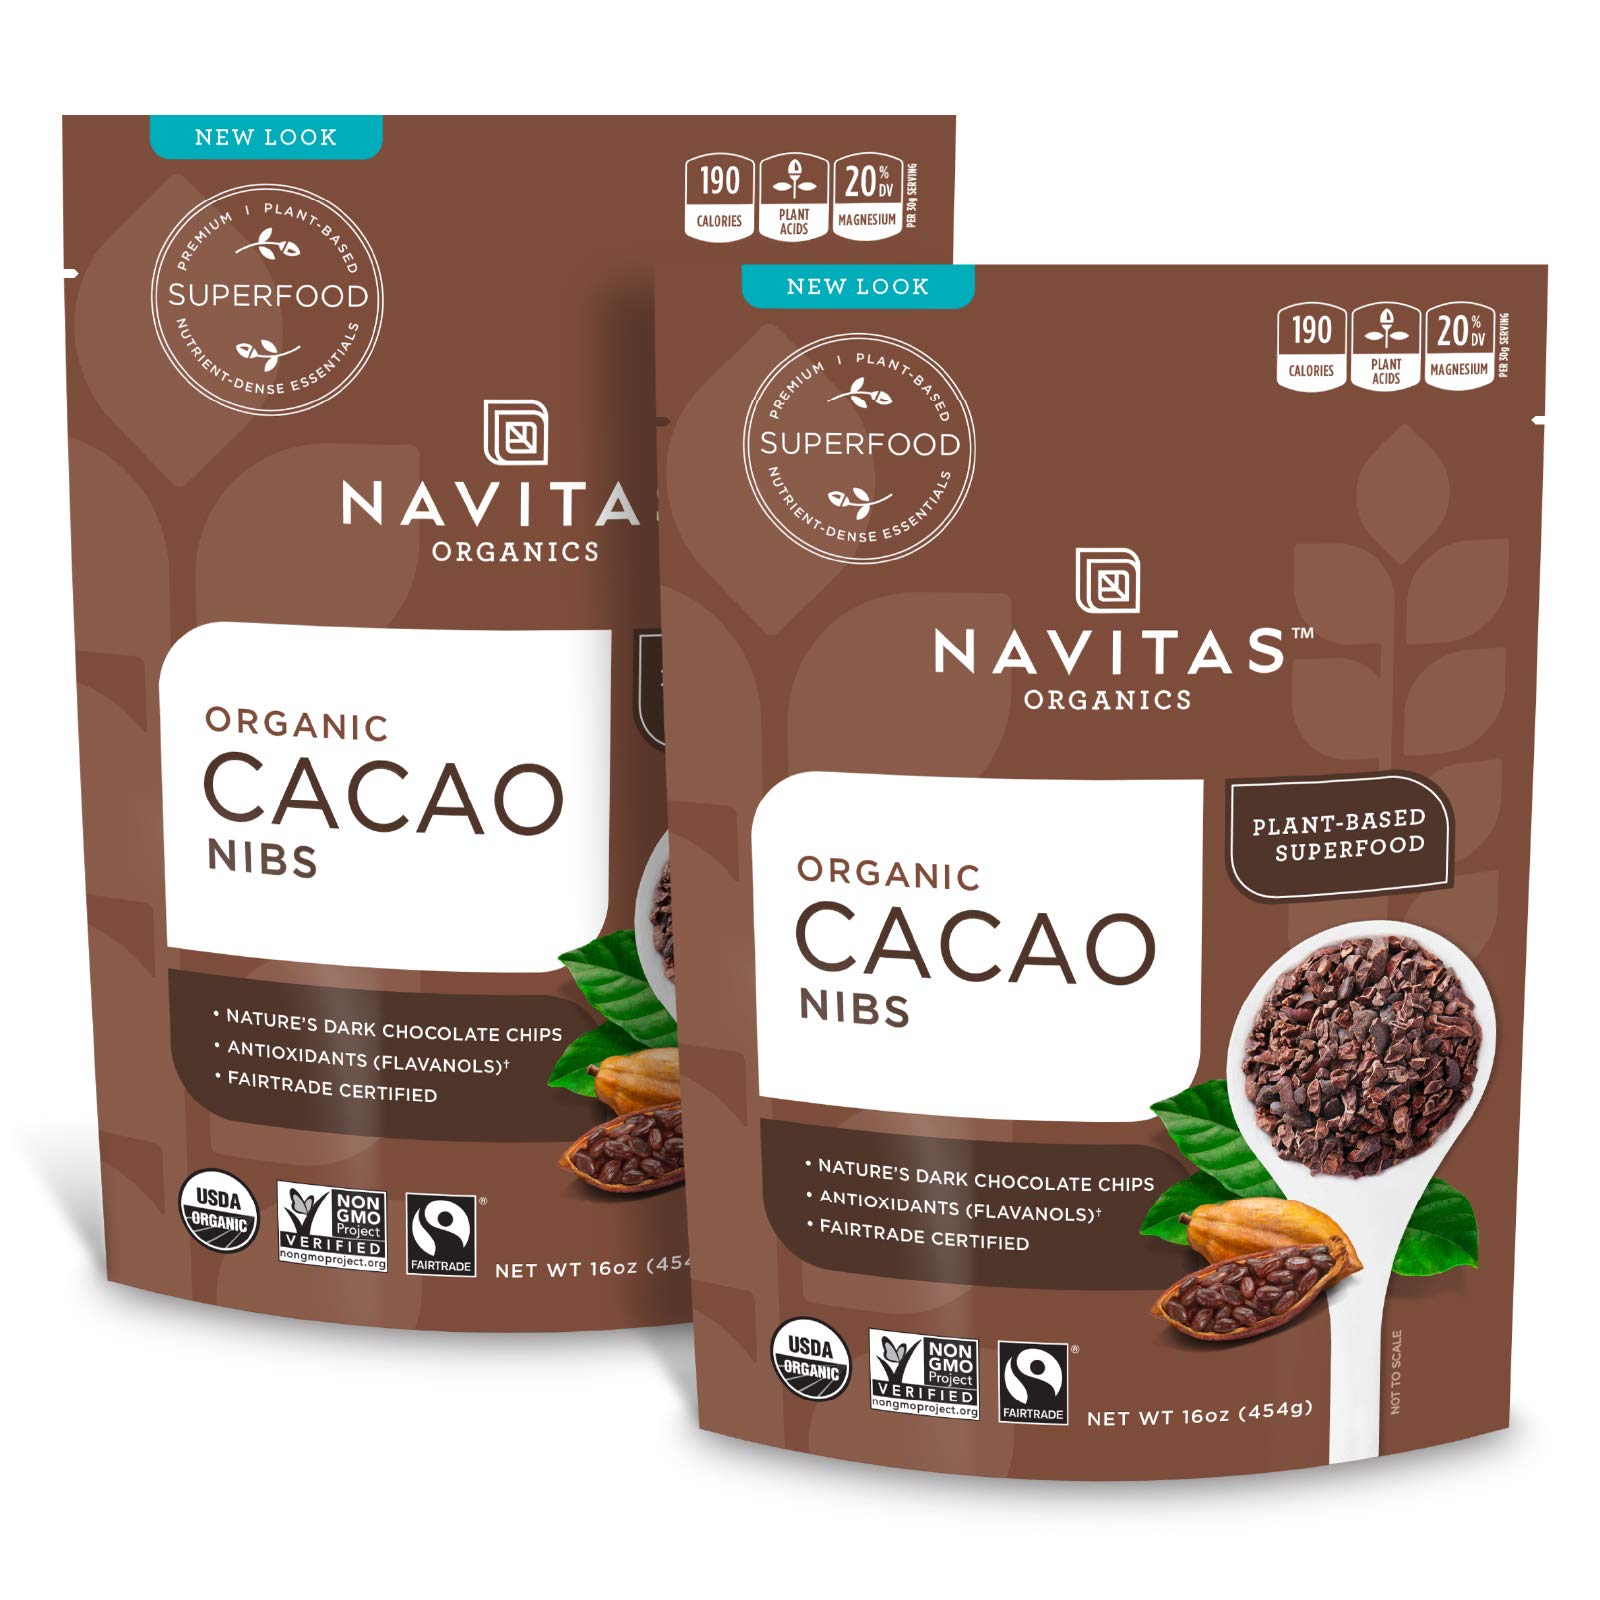 Navitas Organics Cacao Nibs 16oz. (2-Pack) 30 servings — Organic, Non-GMO, Fair Trade, Gluten-Free Chocolate 1 Pound (Pack of 2),   Only $28.42